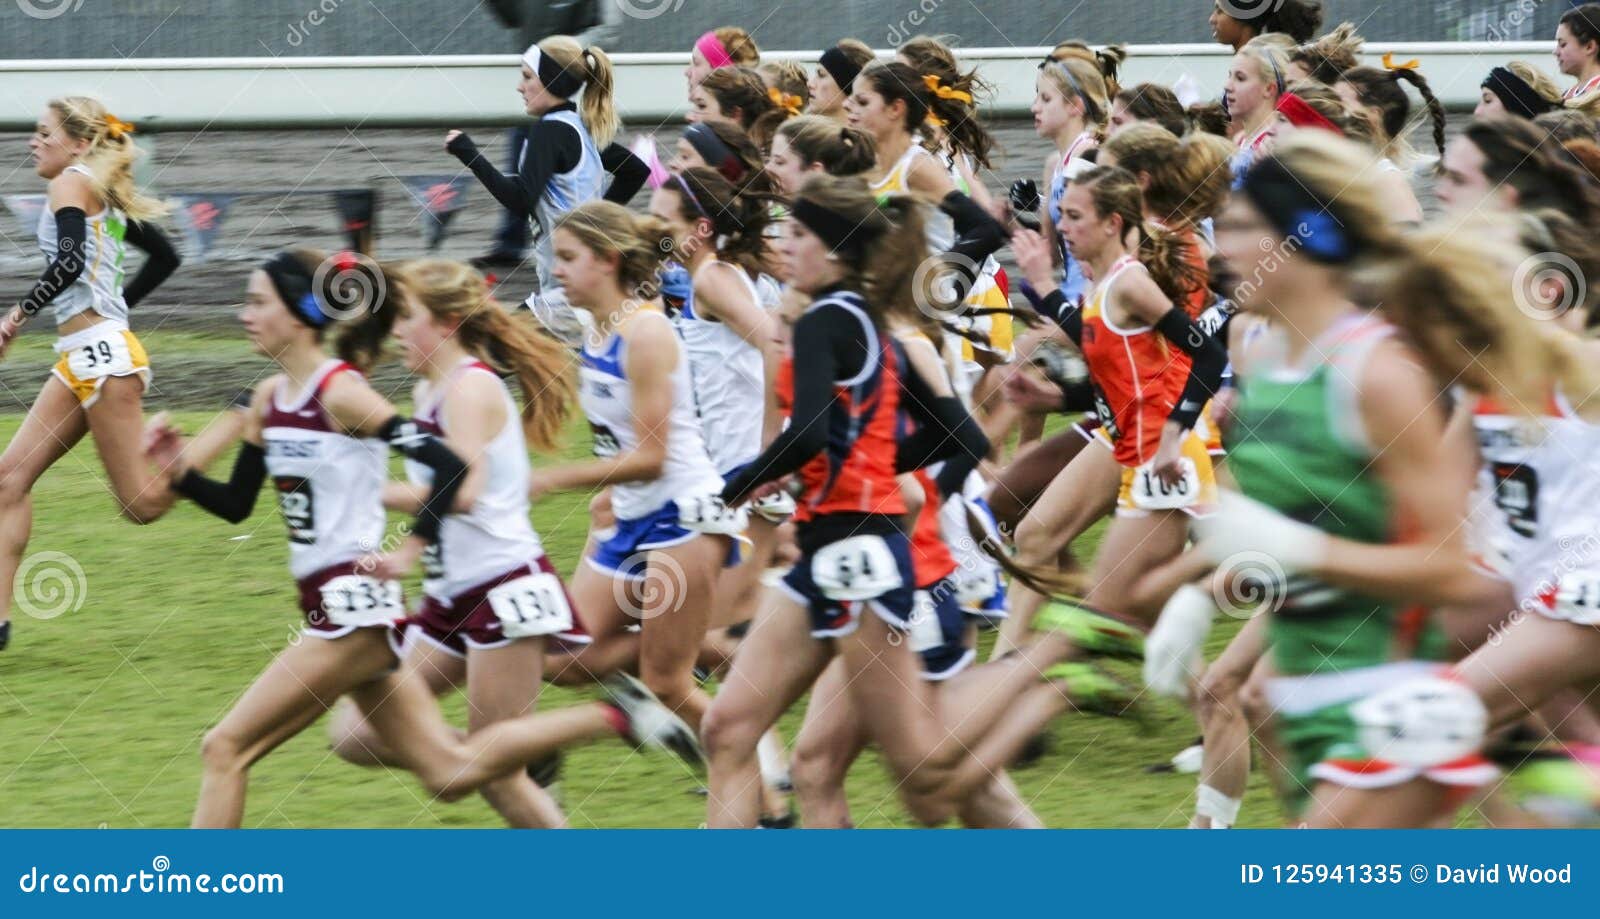 High School Girls Starting a Cross Country Race Editorial Image Image